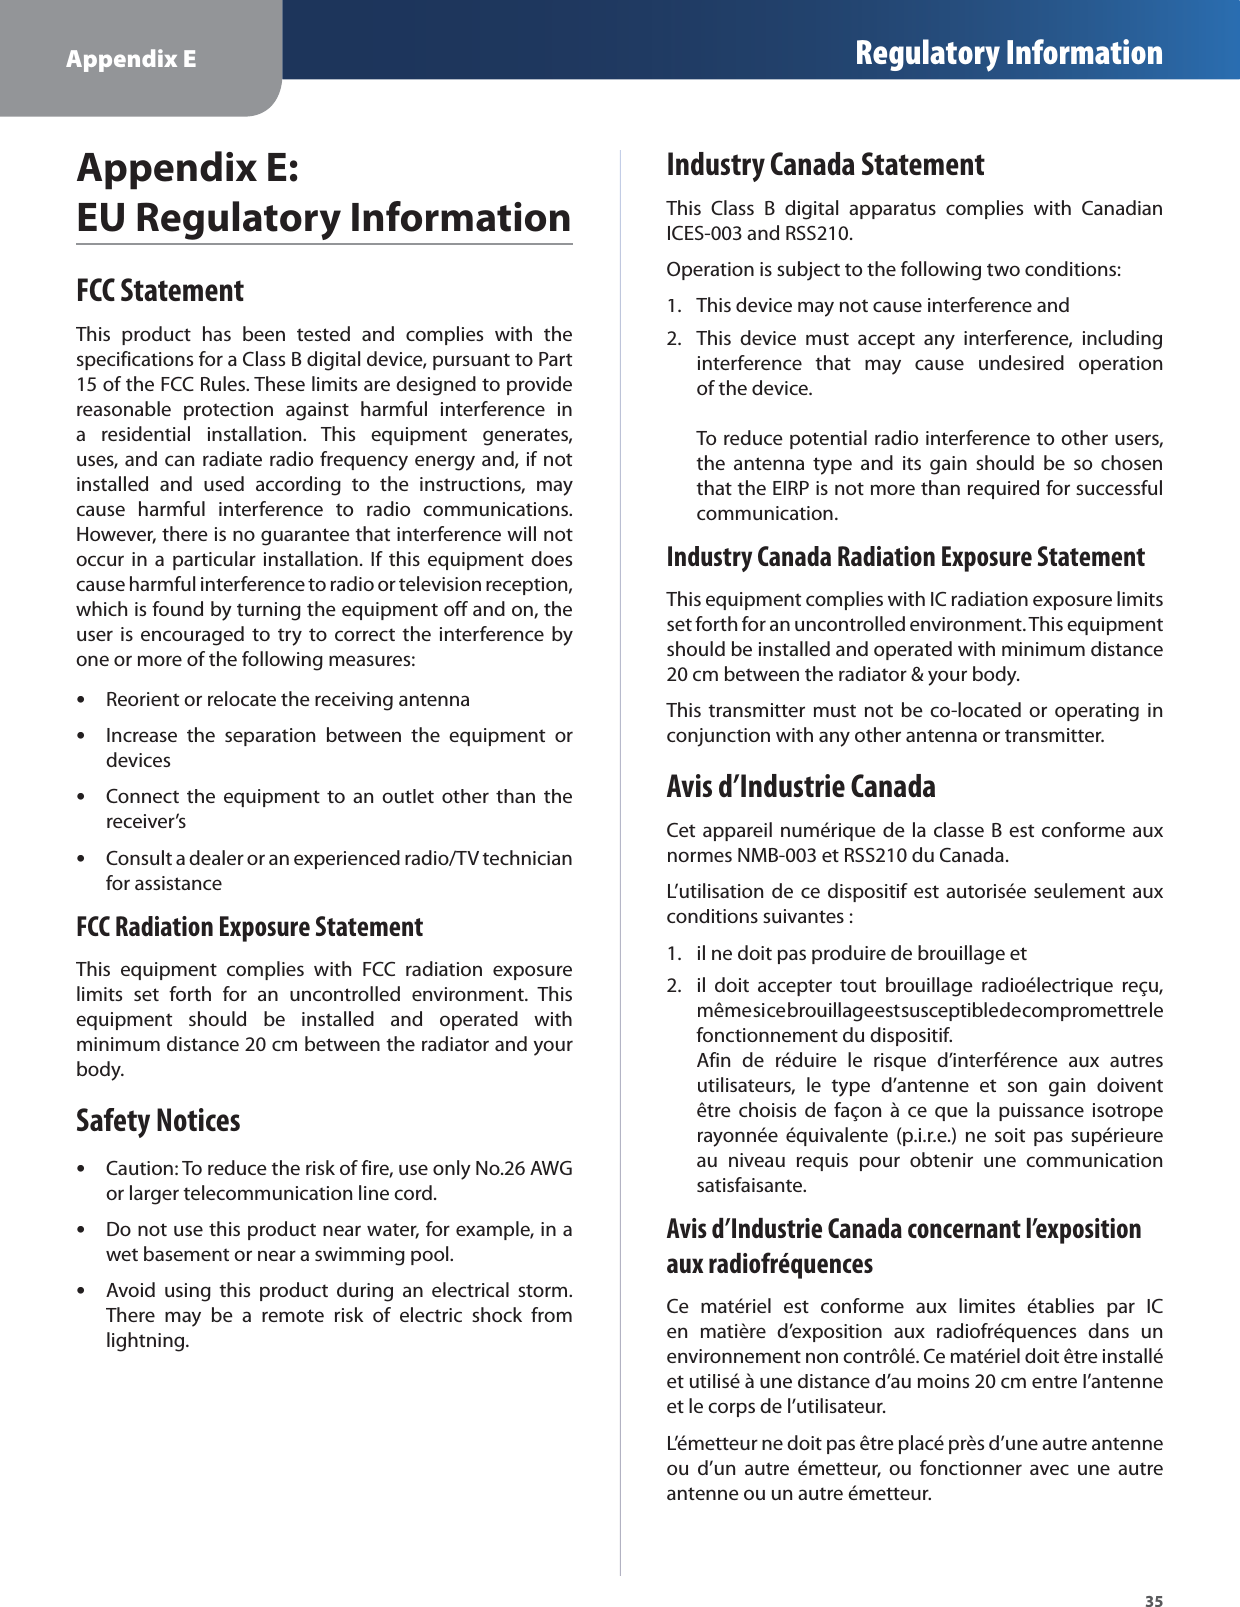 Appendix E Regulatory Information35Appendix E:  EU Regulatory InformationFCC StatementThis product has been tested and complies with thespecifications for a Class B digital device, pursuant to Part15 of the FCC Rules. These limits are designed to providereasonable protection against harmful interference ina residential installation. This equipment generates,uses, and can radiate radio frequency energy and, if notinstalled and used according to the instructions, maycause harmful interference to radio communications.However, there is no guarantee that interference will notoccur in a particular installation. If this equipment doescause harmful interference to radio or television reception,which is found by turning the equipment off and on, theuser is encouraged to try to correct the interference byone or more of the following measures:Reorient or relocate the receiving antennasIncrease the separation between the equipment orsdevicesConnect the equipment to an outlet other than thesreceiver’sConsult a dealer or an experienced radio/TV techniciansfor assistanceFCC Radiation Exposure StatementThis equipment complies with FCC radiation exposurelimits set forth for an uncontrolled environment. Thisequipment should be installed and operated withminimum distance 20 cm between the radiator and yourbody.Safety NoticesCaution: To reduce the risk of fire, use only No.26 AWGsor larger telecommunication line cord.Do not use this product near water, for example, in aswet basement or near a swimming pool.Avoid using this product during an electrical storm.sThere may be a remote risk of electric shock fromlightning.Industry Canada StatementThis Class B digital apparatus complies with CanadianICES-003 and RSS210.Operation is subject to the following two conditions:This device may not cause interference and1.This device must accept any interference, including2.interference that may cause undesired operationof the device. To reduce potential radio interference to other users,the antenna type and its gain should be so chosenthat the EIRP is not more than required for successfulcommunication.Industry Canada Radiation Exposure StatementThis equipment complies with IC radiation exposure limitsset forth for an uncontrolled environment. This equipmentshould be installed and operated with minimum distance20 cm between the radiator &amp; your body.This transmitter must not be co-located or operating inconjunction with any other antenna or transmitter.Avis d’Industrie CanadaCet appareil numérique de la classe B est conforme auxnormes NMB-003 et RSS210 du Canada.L’utilisation de ce dispositif est autorisée seulement auxconditions suivantes :il ne doit pas produire de brouillage et1.il doit accepter tout brouillage radioélectrique reçu,2.même si ce brouillage est susceptible de compromettre le fonctionnement du dispositif.     Afin de réduire le risque d’interférence aux autresutilisateurs, le type d’antenne et son gain doiventêtre choisis de façon à ce que la puissance isotroperayonnée équivalente (p.i.r.e.) ne soit pas supérieureau niveau requis pour obtenir une communicationsatisfaisante.Avis d’Industrie Canada concernant l’exposition aux radiofréquencesCe matériel est conforme aux limites établies par ICen matière d’exposition aux radiofréquences dans unenvironnement non contrôlé. Ce matériel doit être installéet utilisé à une distance d’au moins 20 cm entre l’antenneet le corps de l’utilisateur.L’émetteur ne doit pas être placé près d’une autre antenneou d’un autre émetteur, ou fonctionner avec une autreantenne ou un autre émetteur.